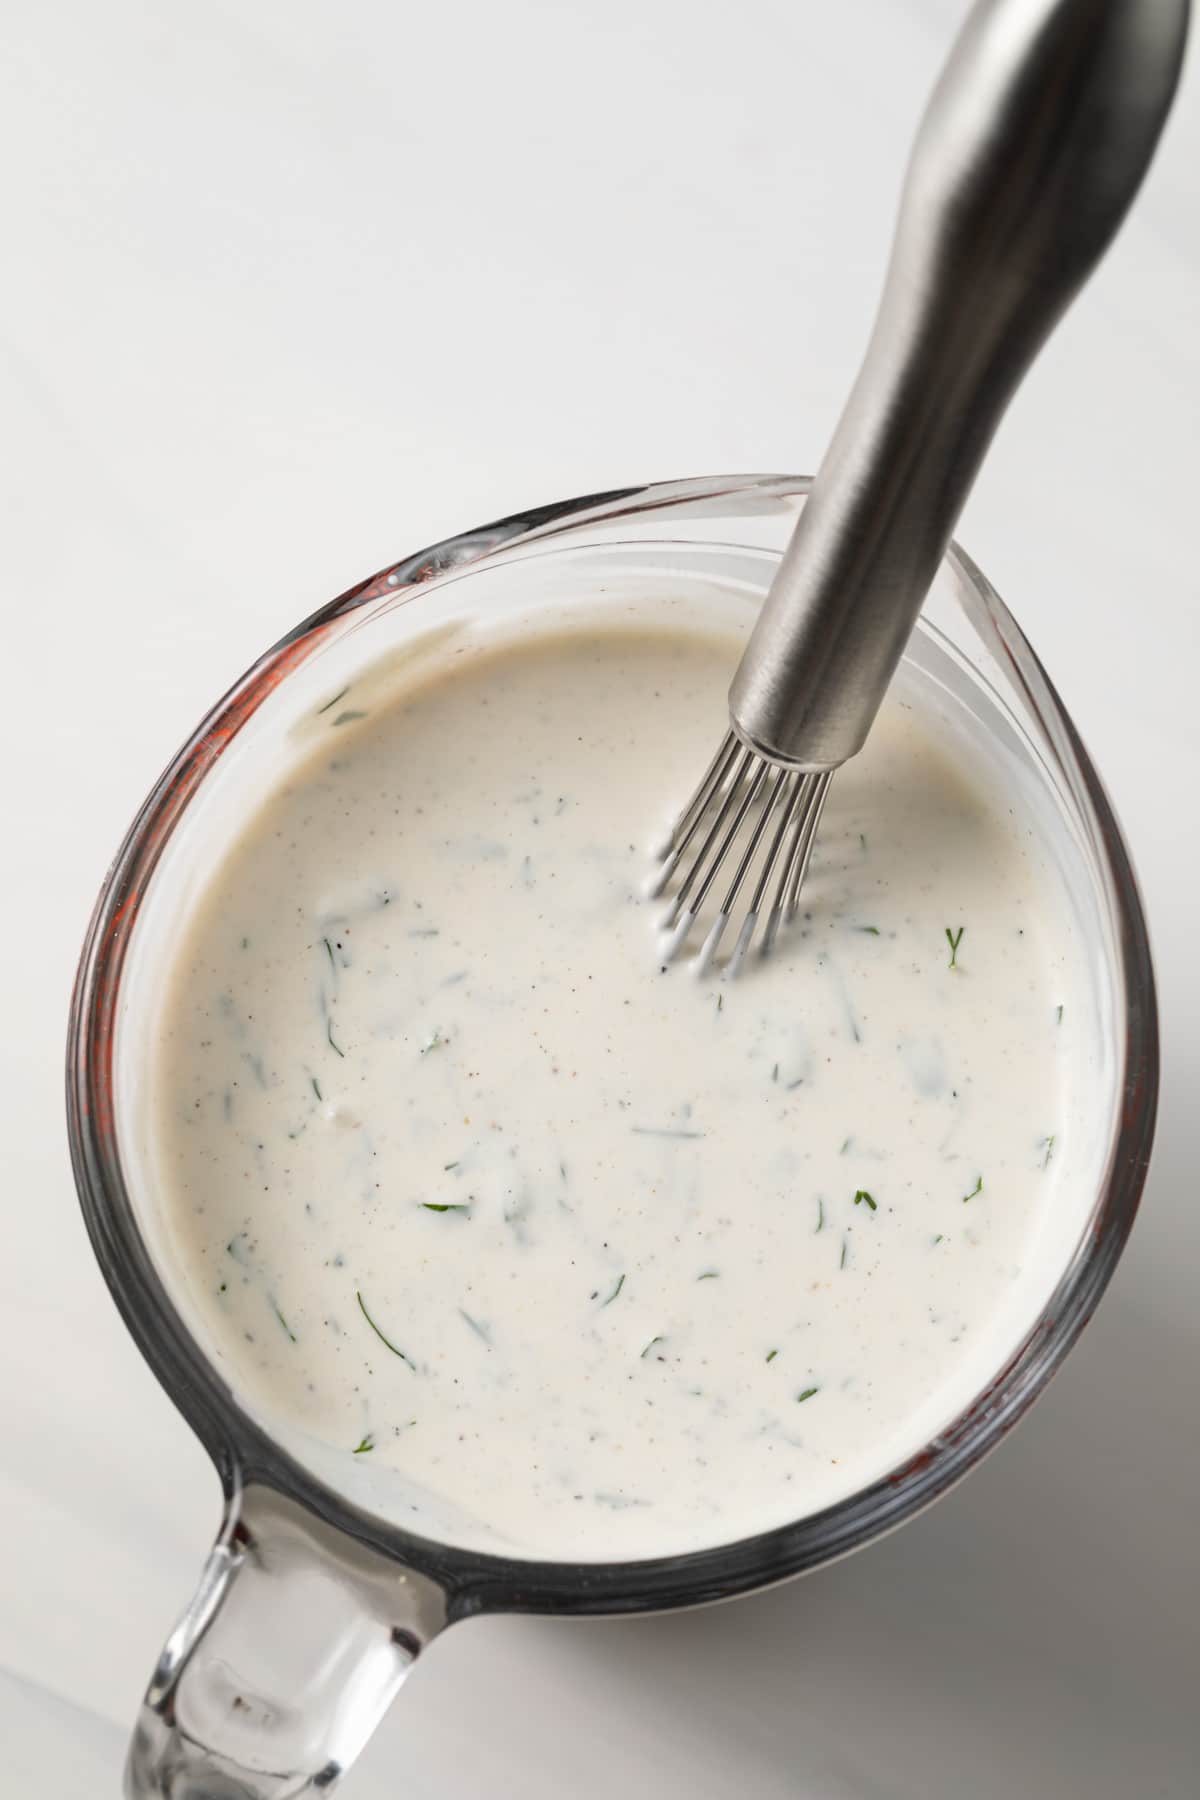 Ranch dressing in glass measuring cup.